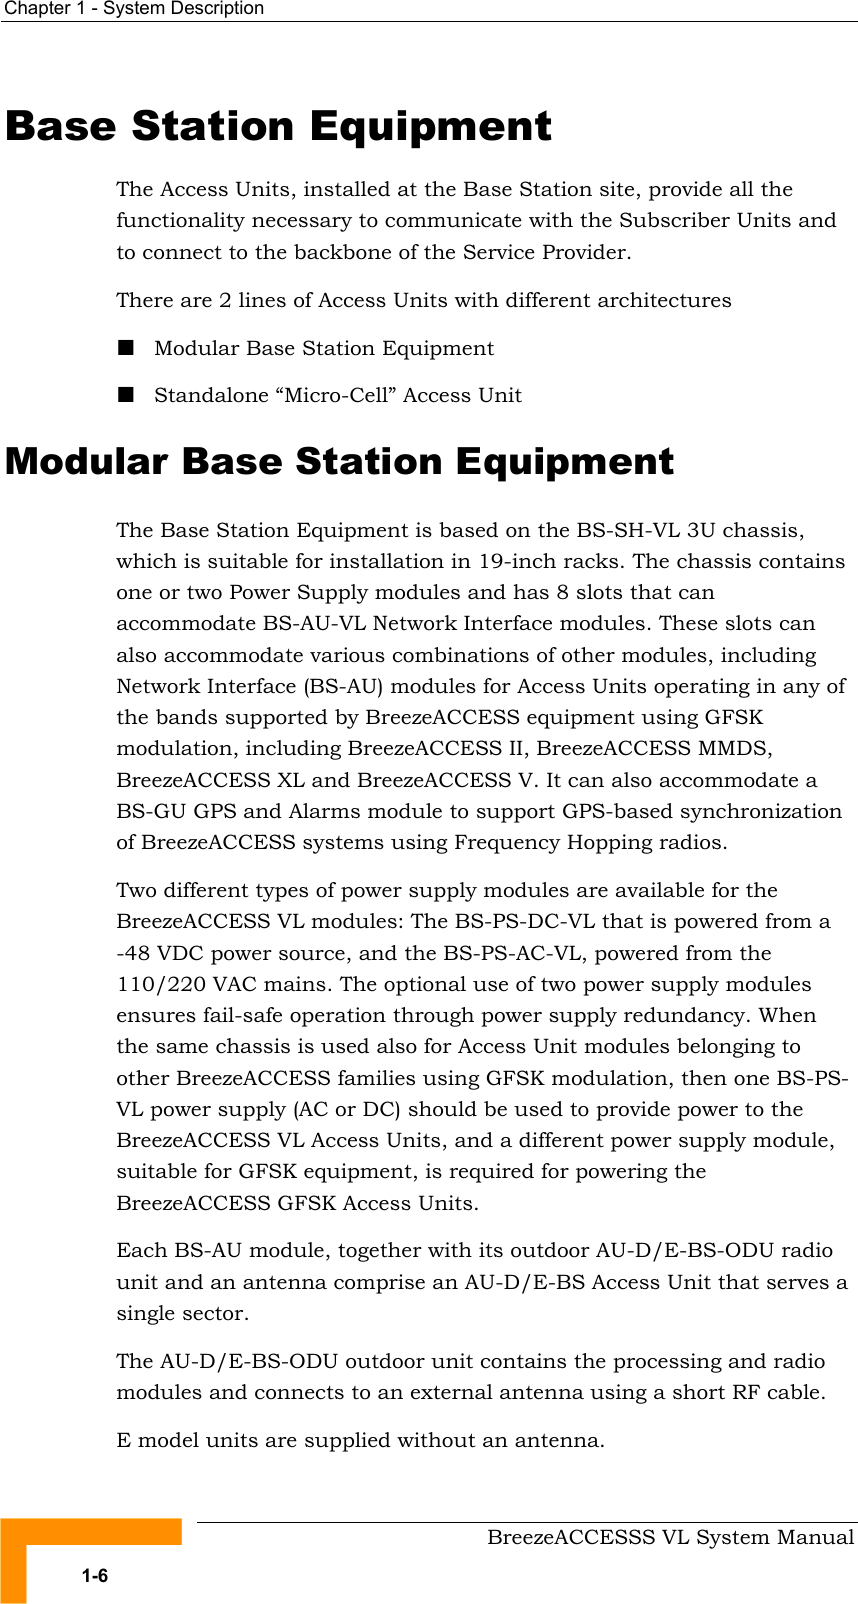 Chapter  1 - System Description     BreezeACCESSS VL System Manual 1-6 Base Station Equipment The Access Units, installed at the Base Station site, provide all the functionality necessary to communicate with the Subscriber Units and to connect to the backbone of the Service Provider. There are 2 lines of Access Units with different architectures ! Modular Base Station Equipment ! Standalone “Micro-Cell” Access Unit Modular Base Station Equipment The Base Station Equipment is based on the BS-SH-VL 3U chassis, which is suitable for installation in 19-inch racks. The chassis contains one or two Power Supply modules and has 8 slots that can accommodate BS-AU-VL Network Interface modules. These slots can also accommodate various combinations of other modules, including Network Interface (BS-AU) modules for Access Units operating in any of the bands supported by BreezeACCESS equipment using GFSK modulation, including BreezeACCESS II, BreezeACCESS MMDS, BreezeACCESS XL and BreezeACCESS V. It can also accommodate a BS-GU GPS and Alarms module to support GPS-based synchronization of BreezeACCESS systems using Frequency Hopping radios.  Two different types of power supply modules are available for the BreezeACCESS VL modules: The BS-PS-DC-VL that is powered from a -48 VDC power source, and the BS-PS-AC-VL, powered from the 110/220 VAC mains. The optional use of two power supply modules ensures fail-safe operation through power supply redundancy. When the same chassis is used also for Access Unit modules belonging to other BreezeACCESS families using GFSK modulation, then one BS-PS-VL power supply (AC or DC) should be used to provide power to the BreezeACCESS VL Access Units, and a different power supply module, suitable for GFSK equipment, is required for powering the BreezeACCESS GFSK Access Units.  Each BS-AU module, together with its outdoor AU-D/E-BS-ODU radio unit and an antenna comprise an AU-D/E-BS Access Unit that serves a single sector. The AU-D/E-BS-ODU outdoor unit contains the processing and radio modules and connects to an external antenna using a short RF cable. E model units are supplied without an antenna. 